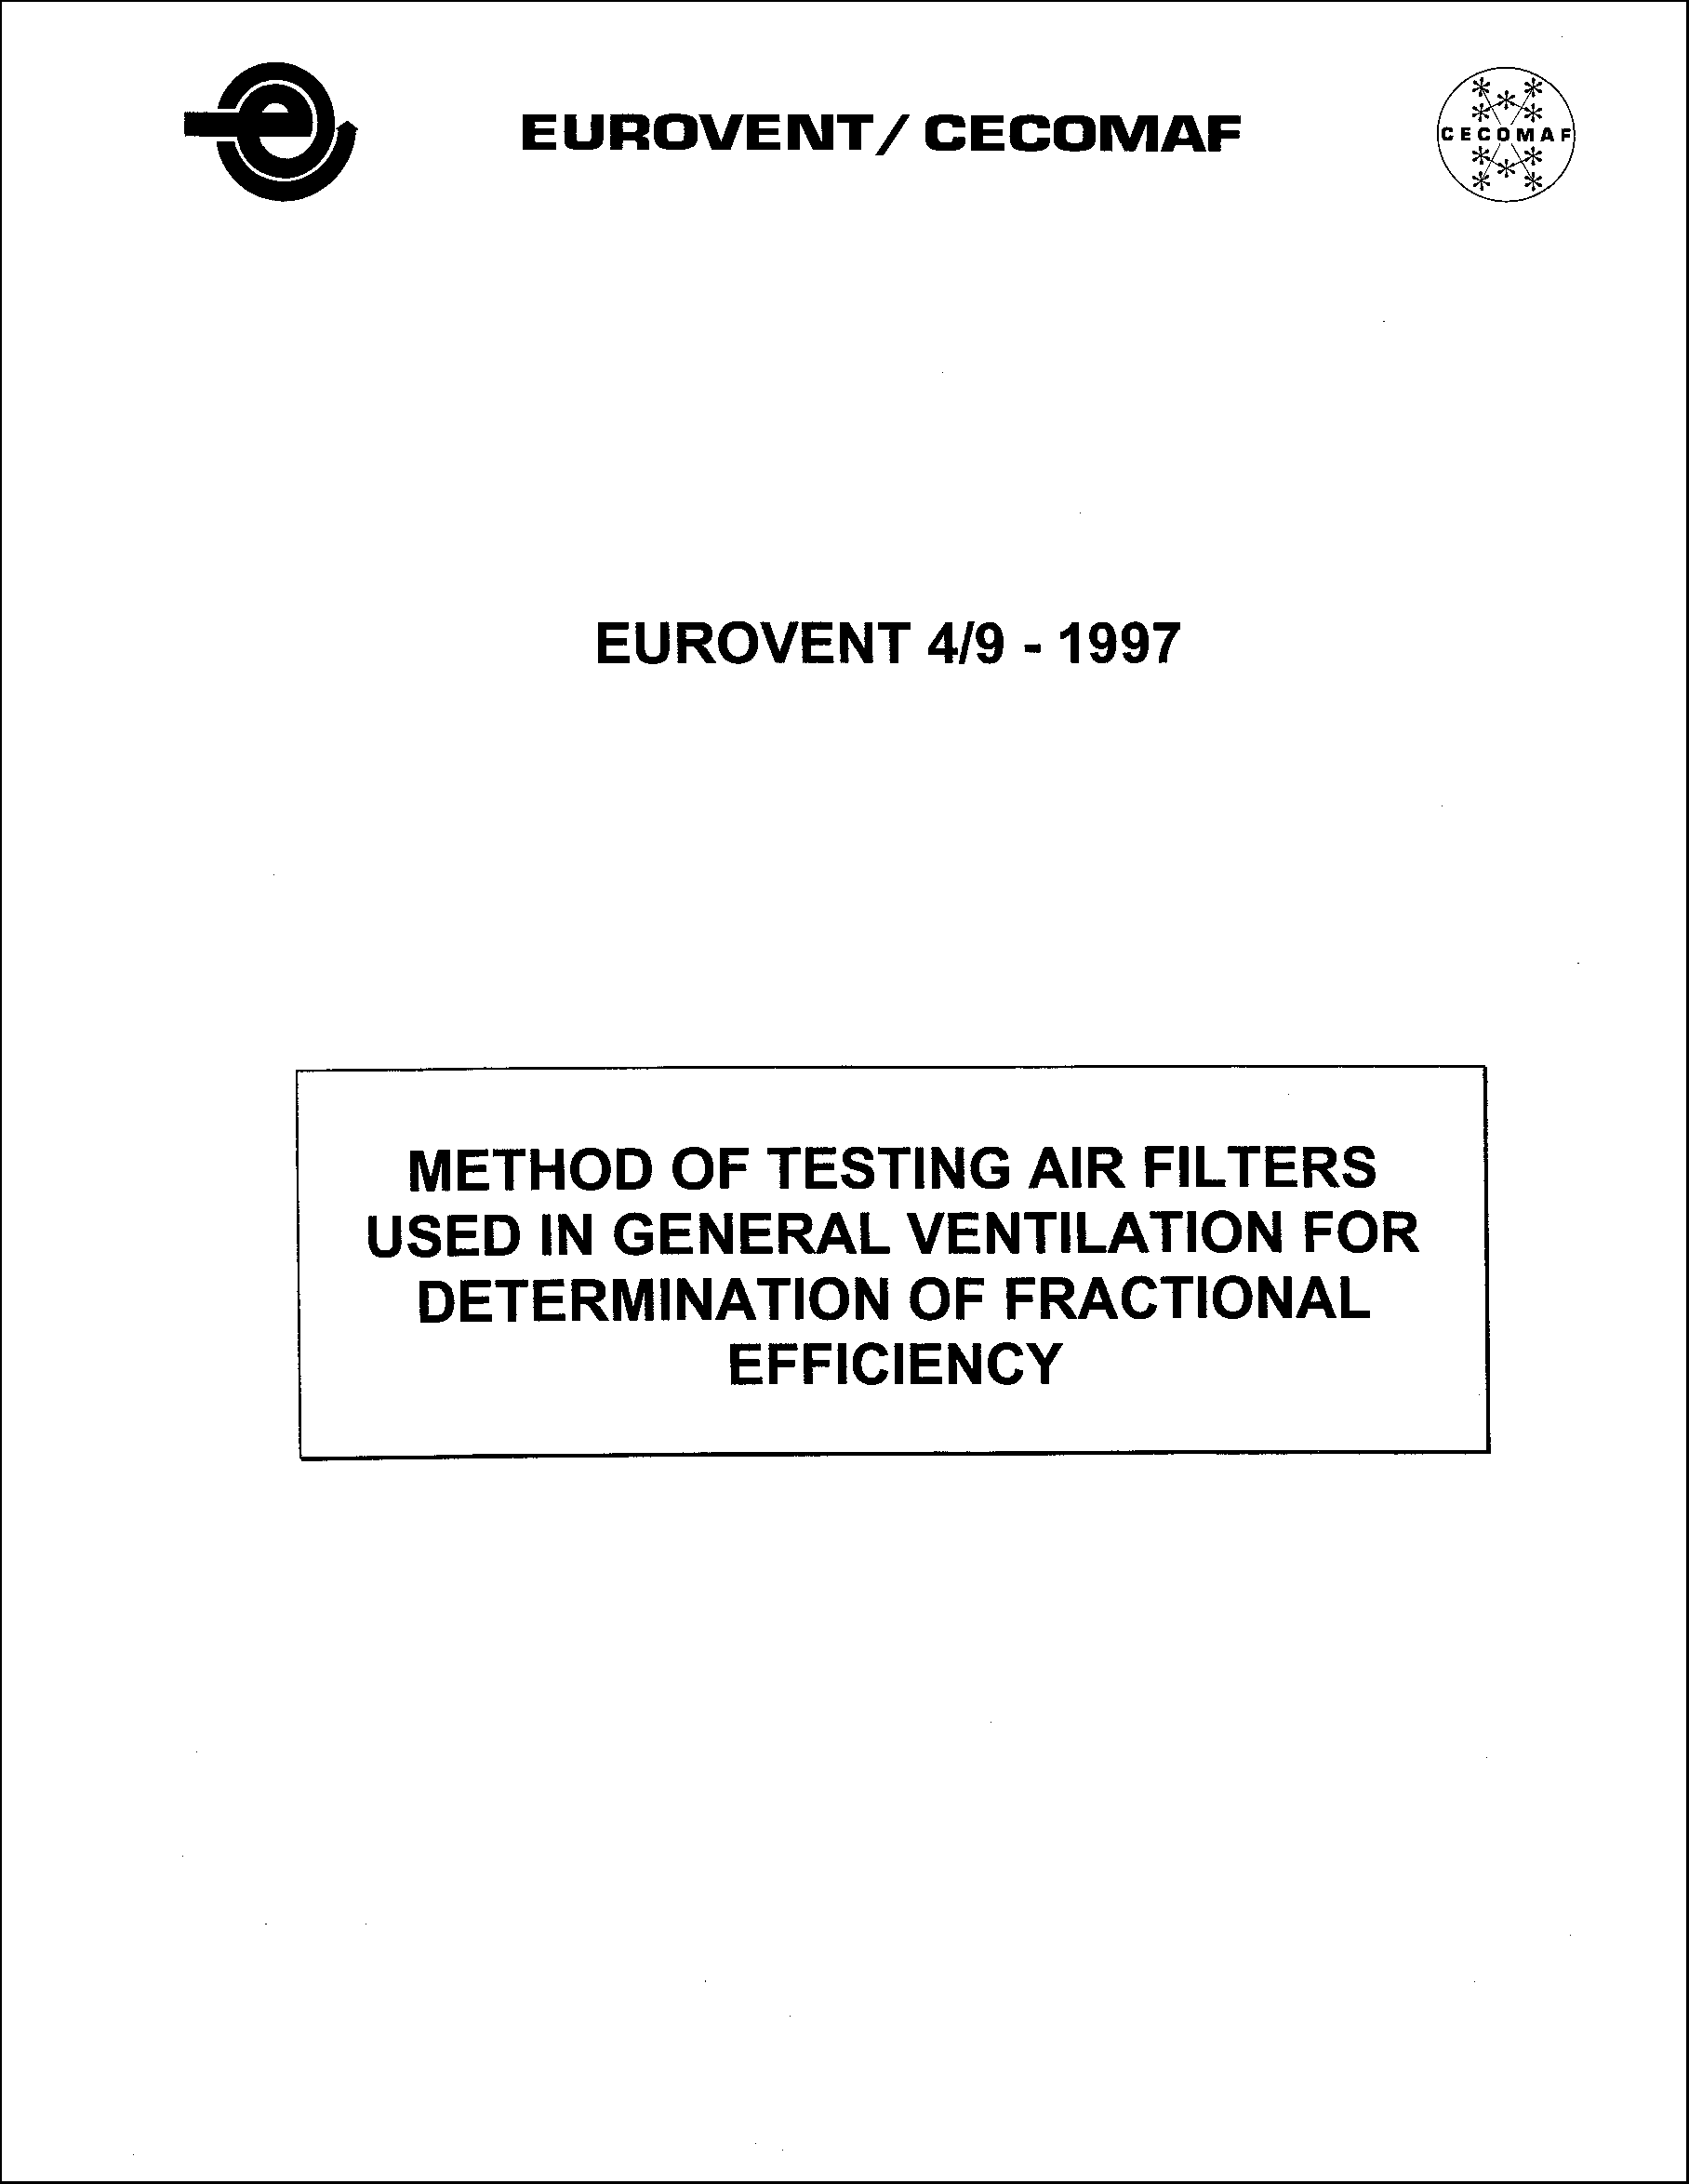 1997 - Method of testing air filters used in general ventilation for determination of fractional efficiency